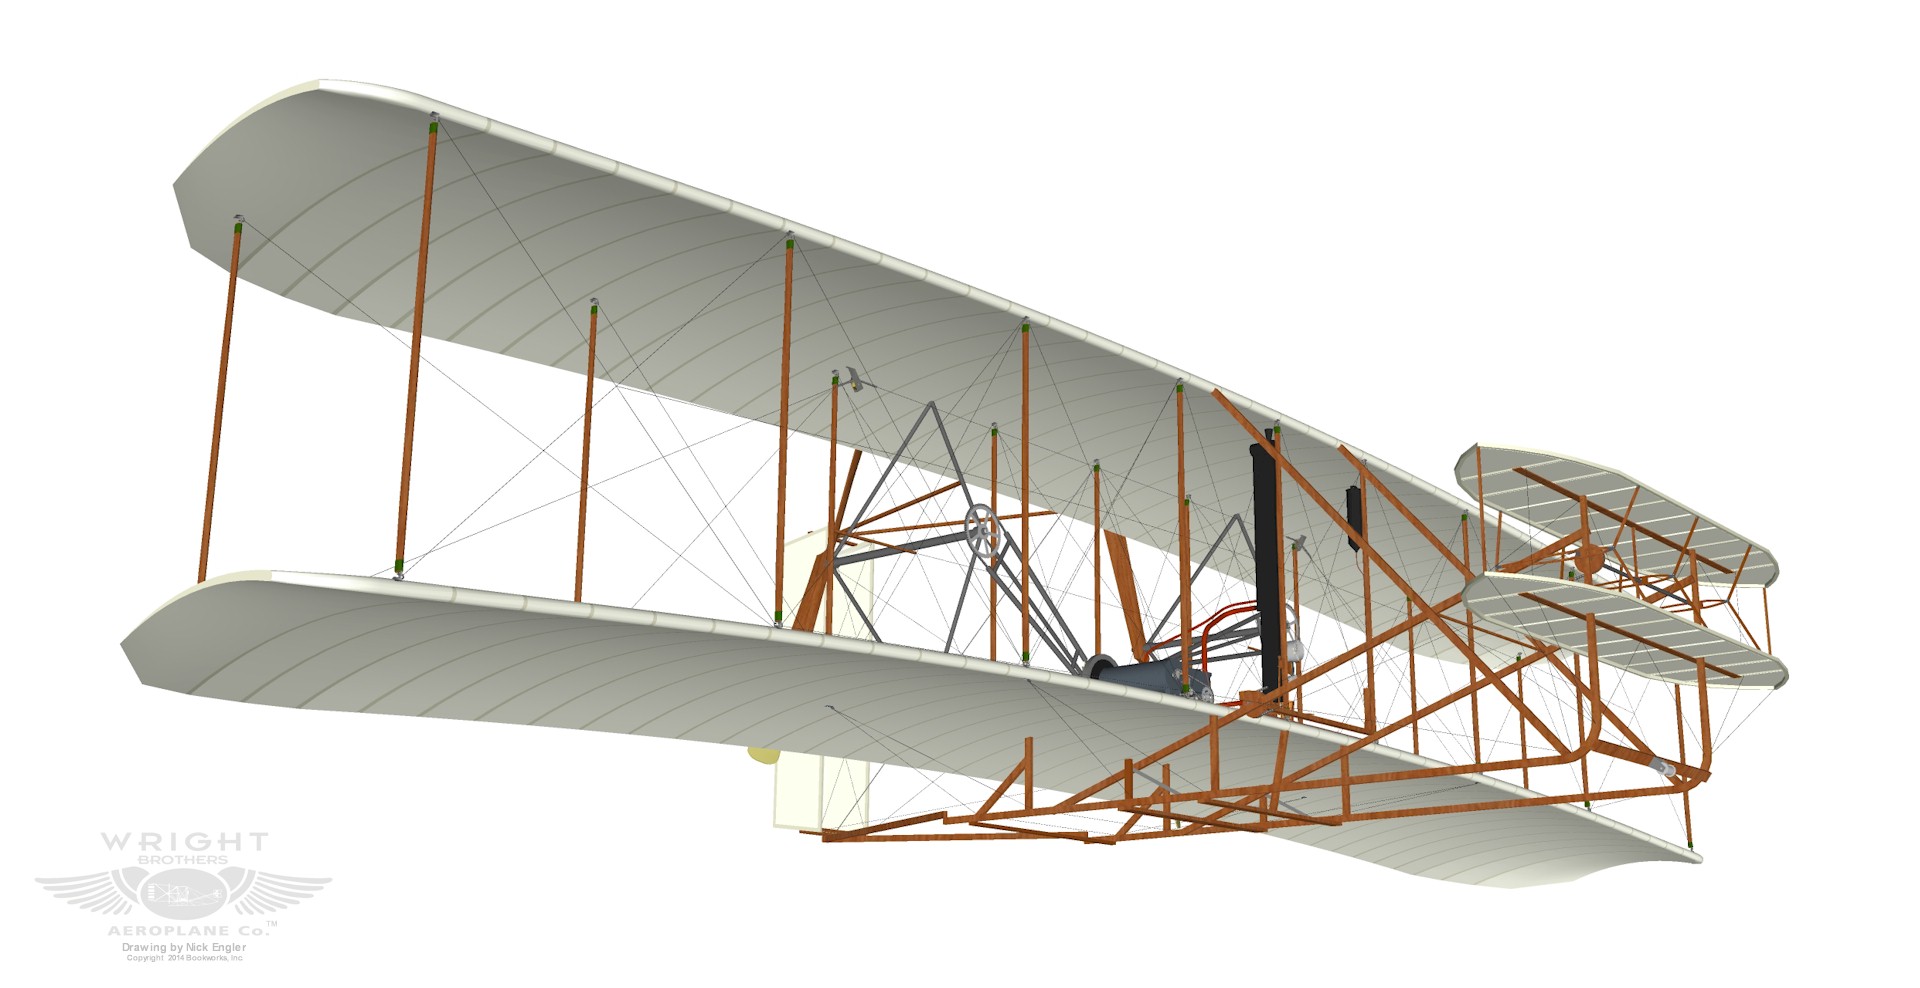 wright flyer clipart - photo #10